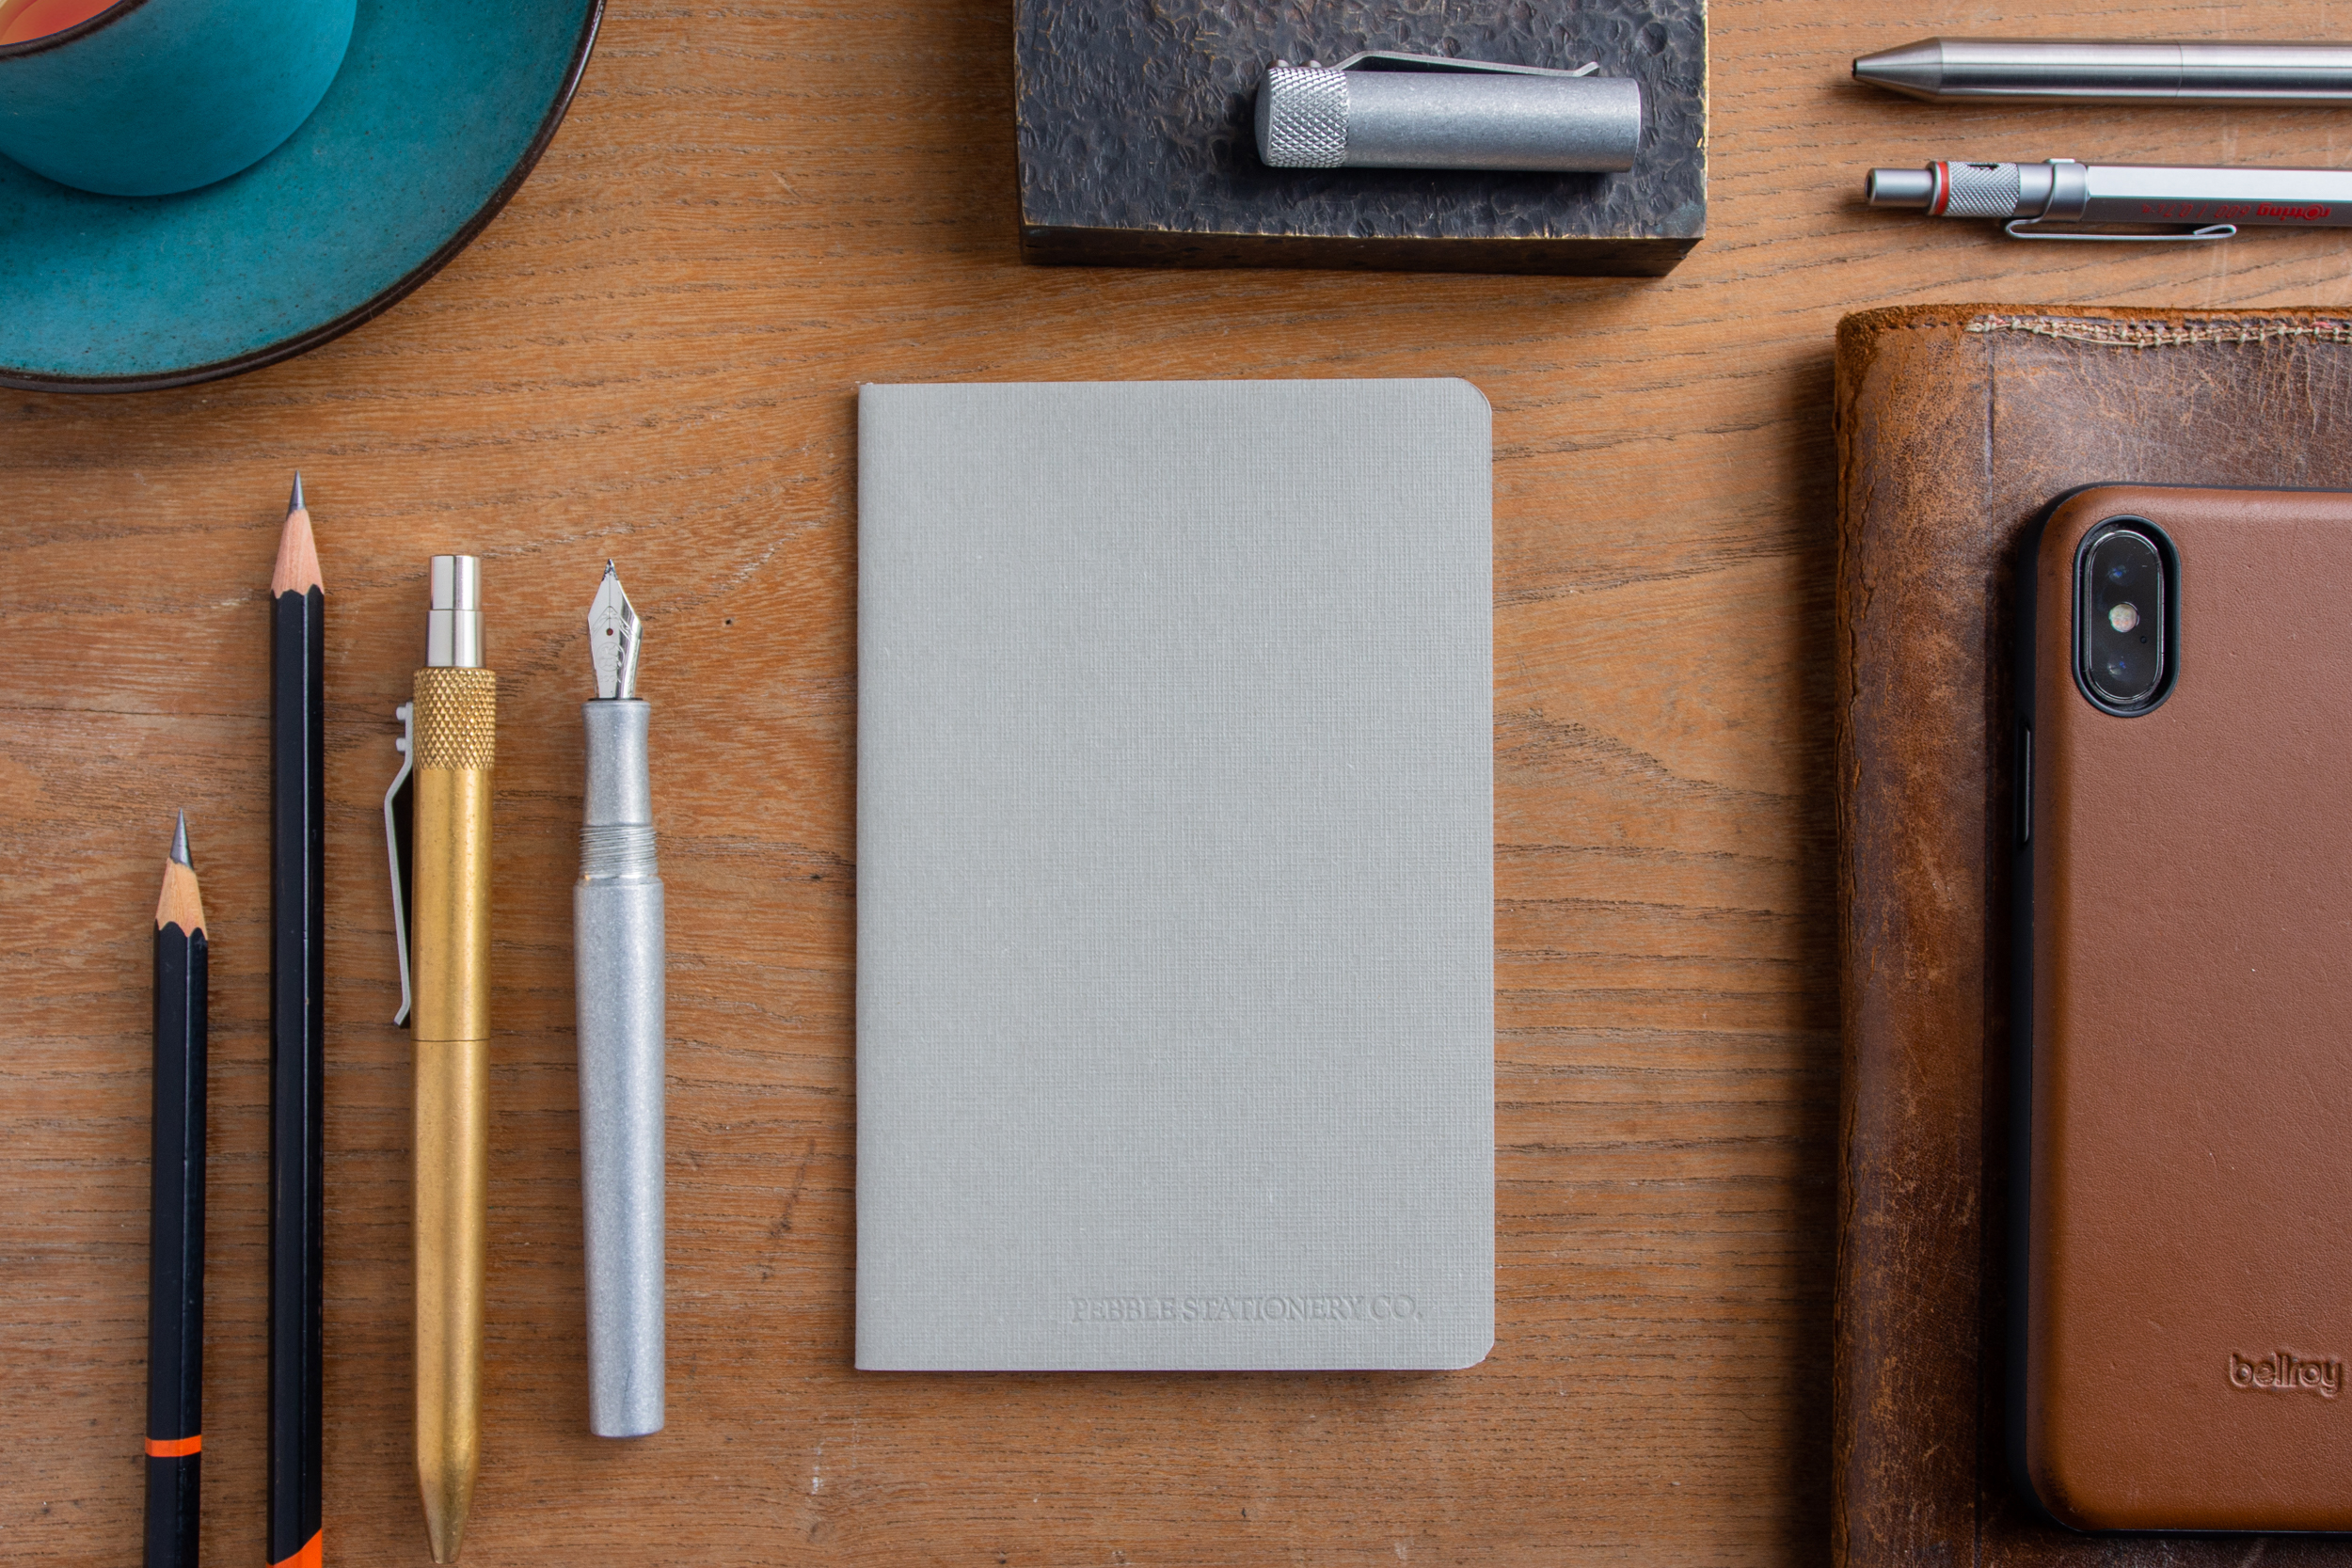 GIVEAWAY – Pebble Stationery Co. Pocket Notebooks!